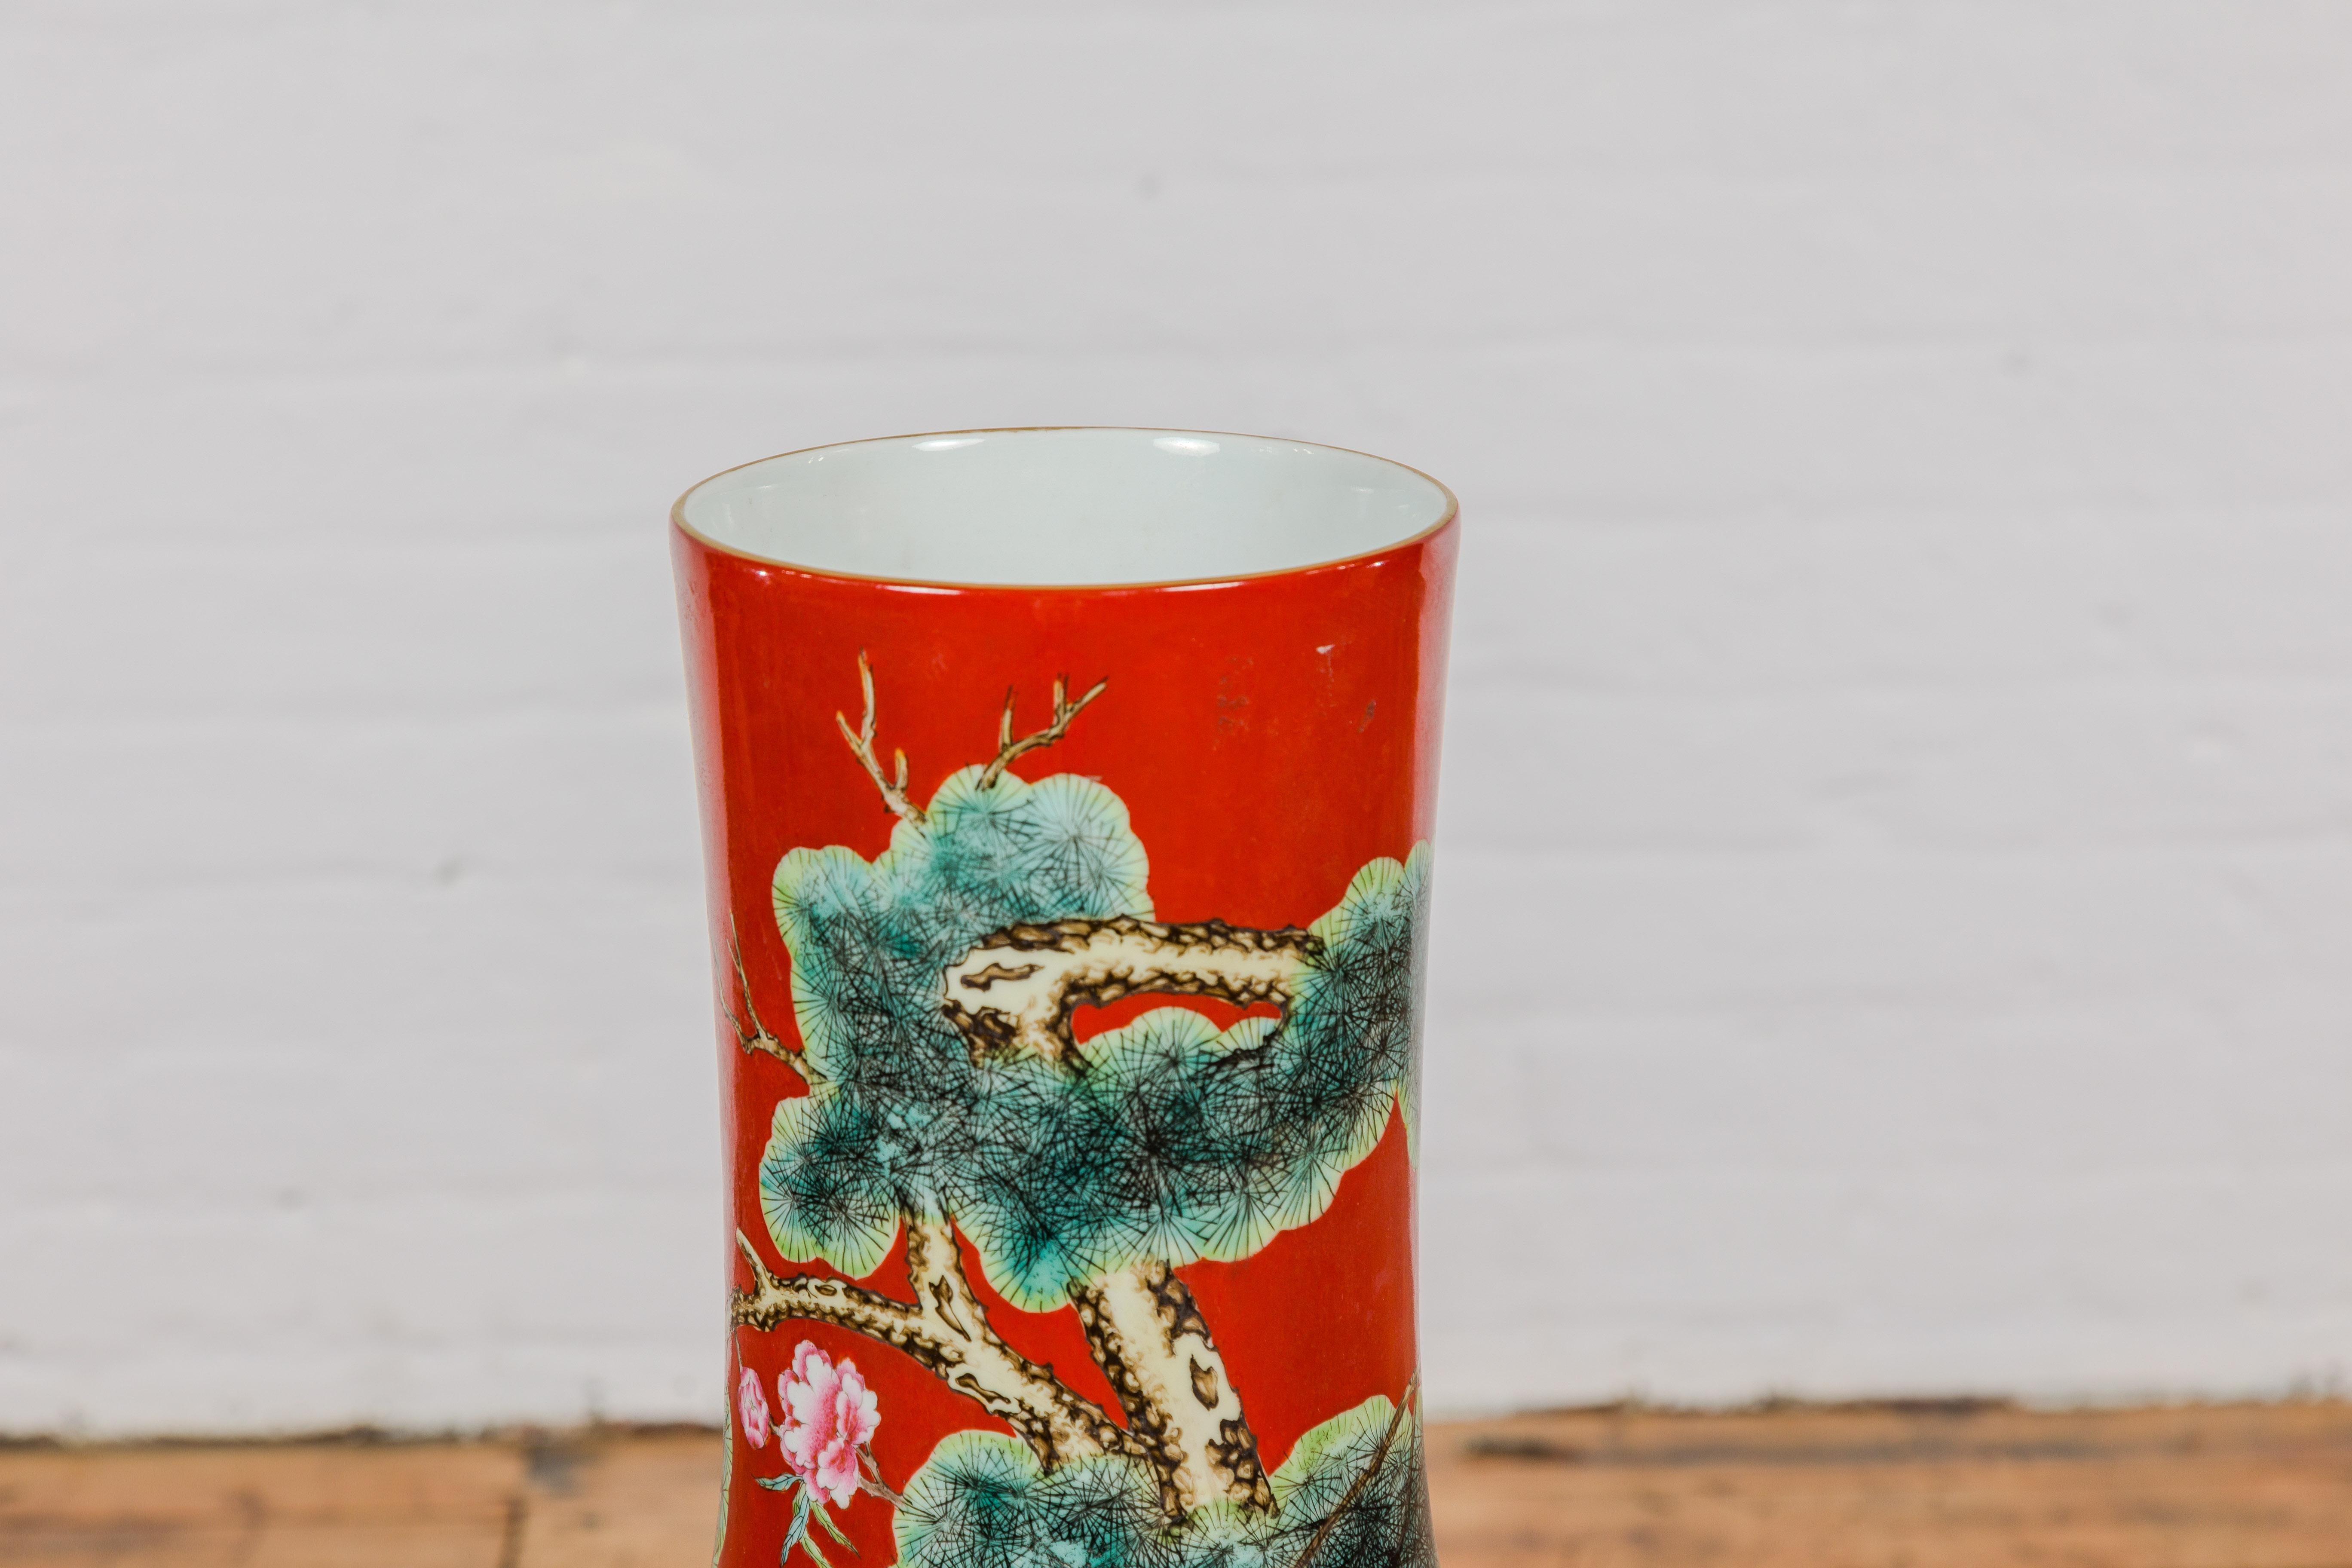 Kendi Style Midcentury Red Porcelain Vase with Hand-Painted Birds and Flowers In Good Condition For Sale In Yonkers, NY